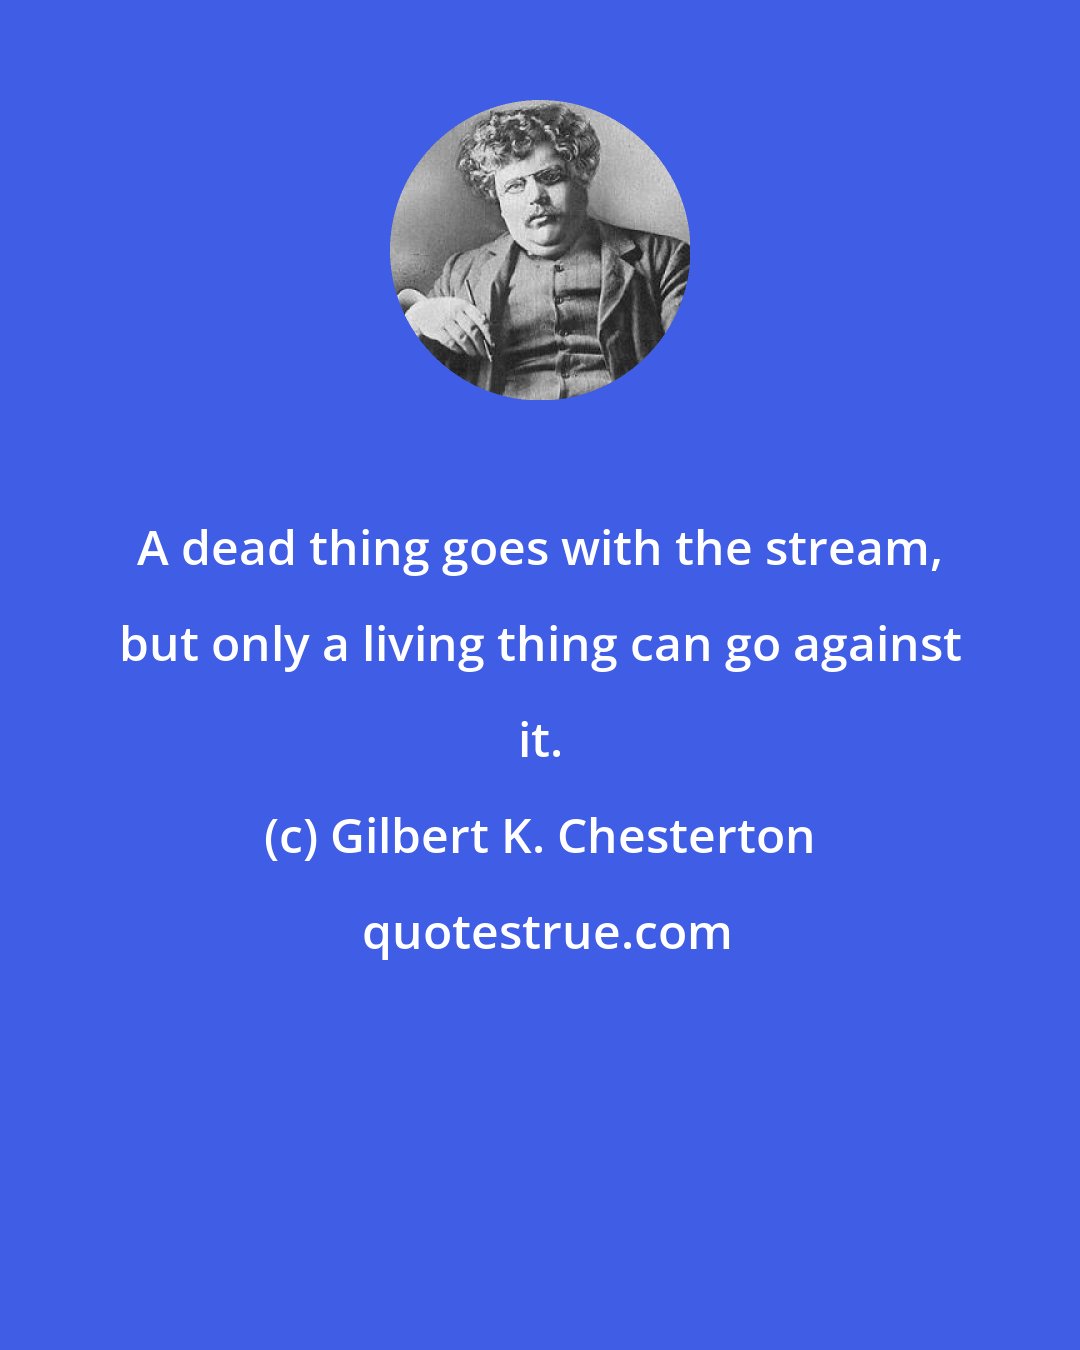 Gilbert K. Chesterton: A dead thing goes with the stream, but only a living thing can go against it.